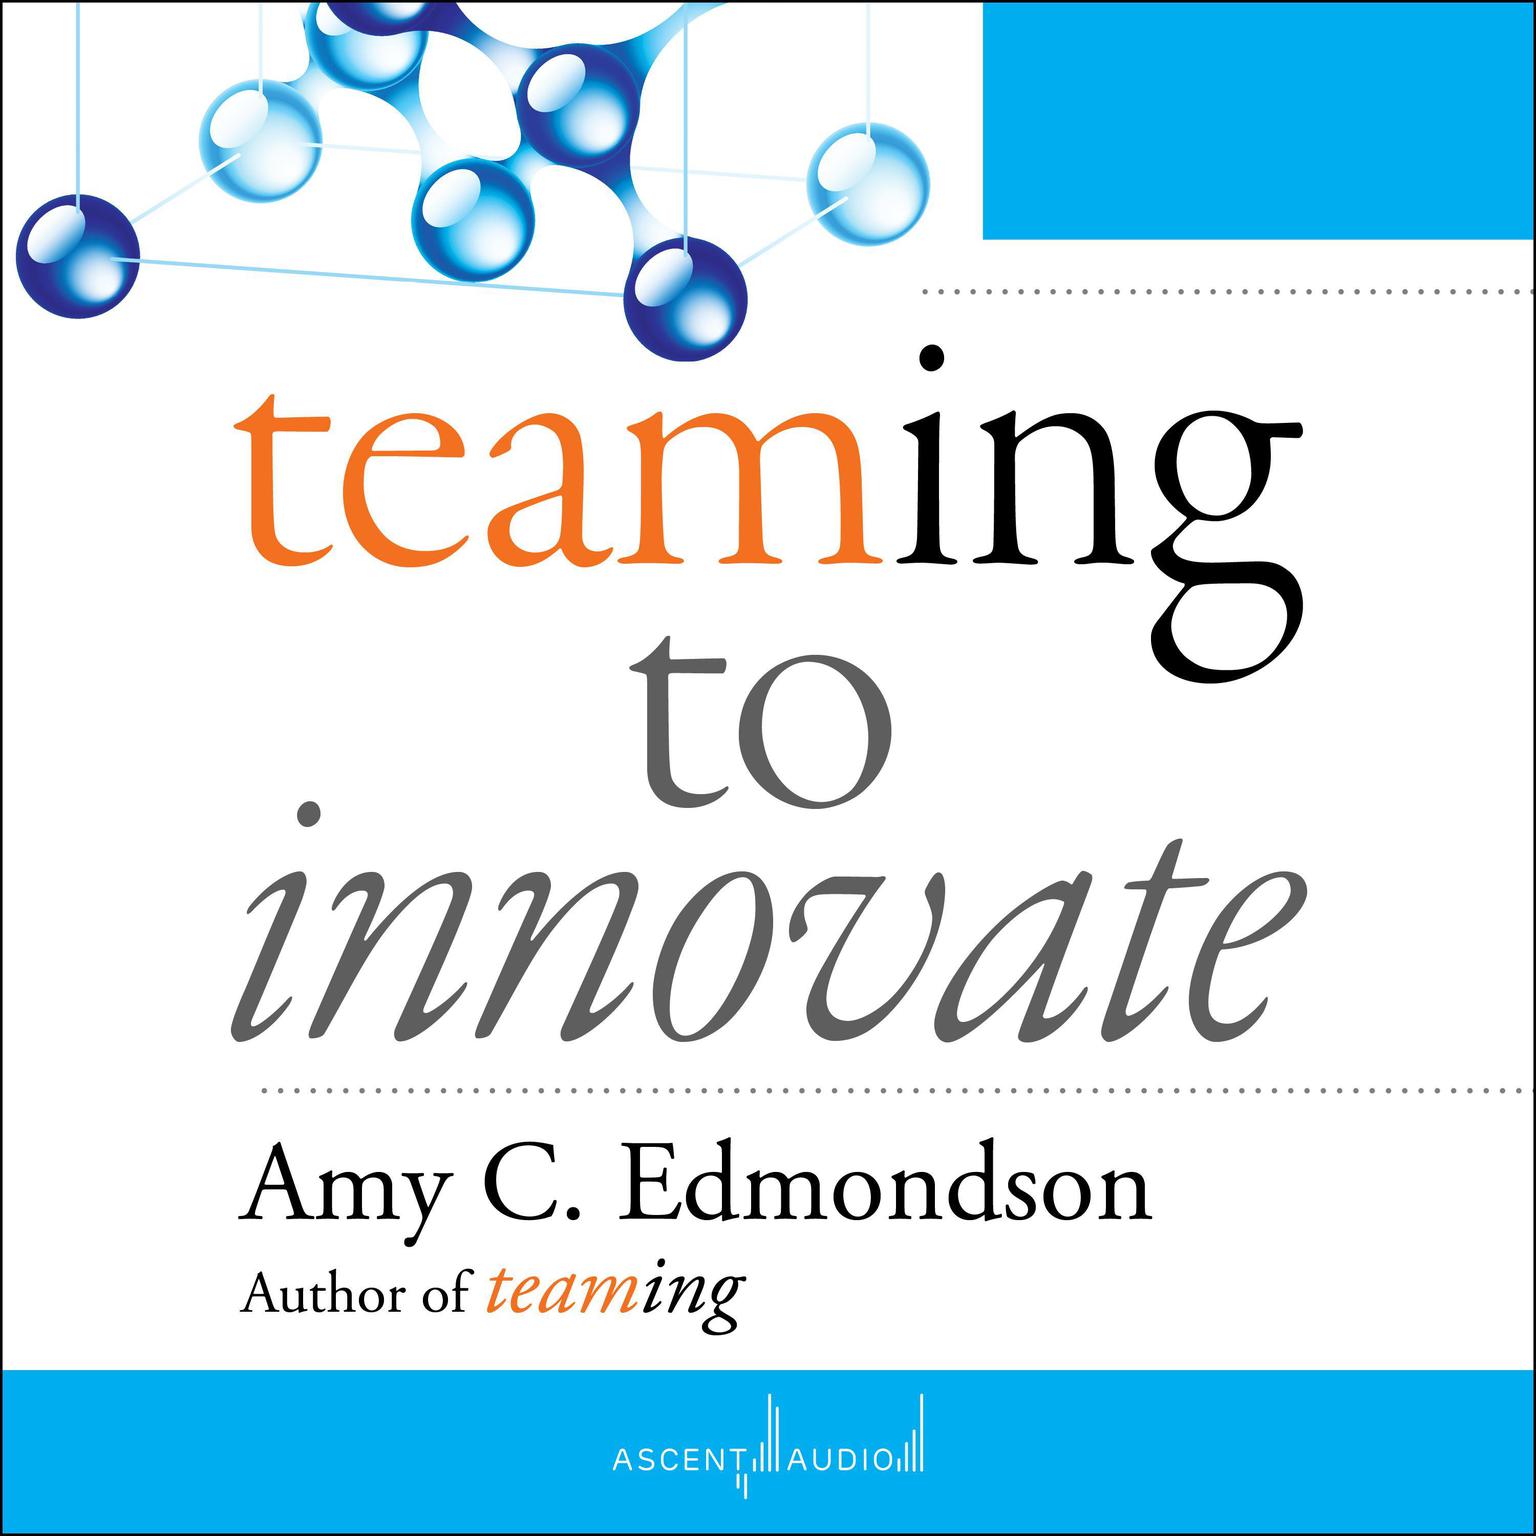 Teaming to Innovate Audiobook, by Amy C. Edmondson